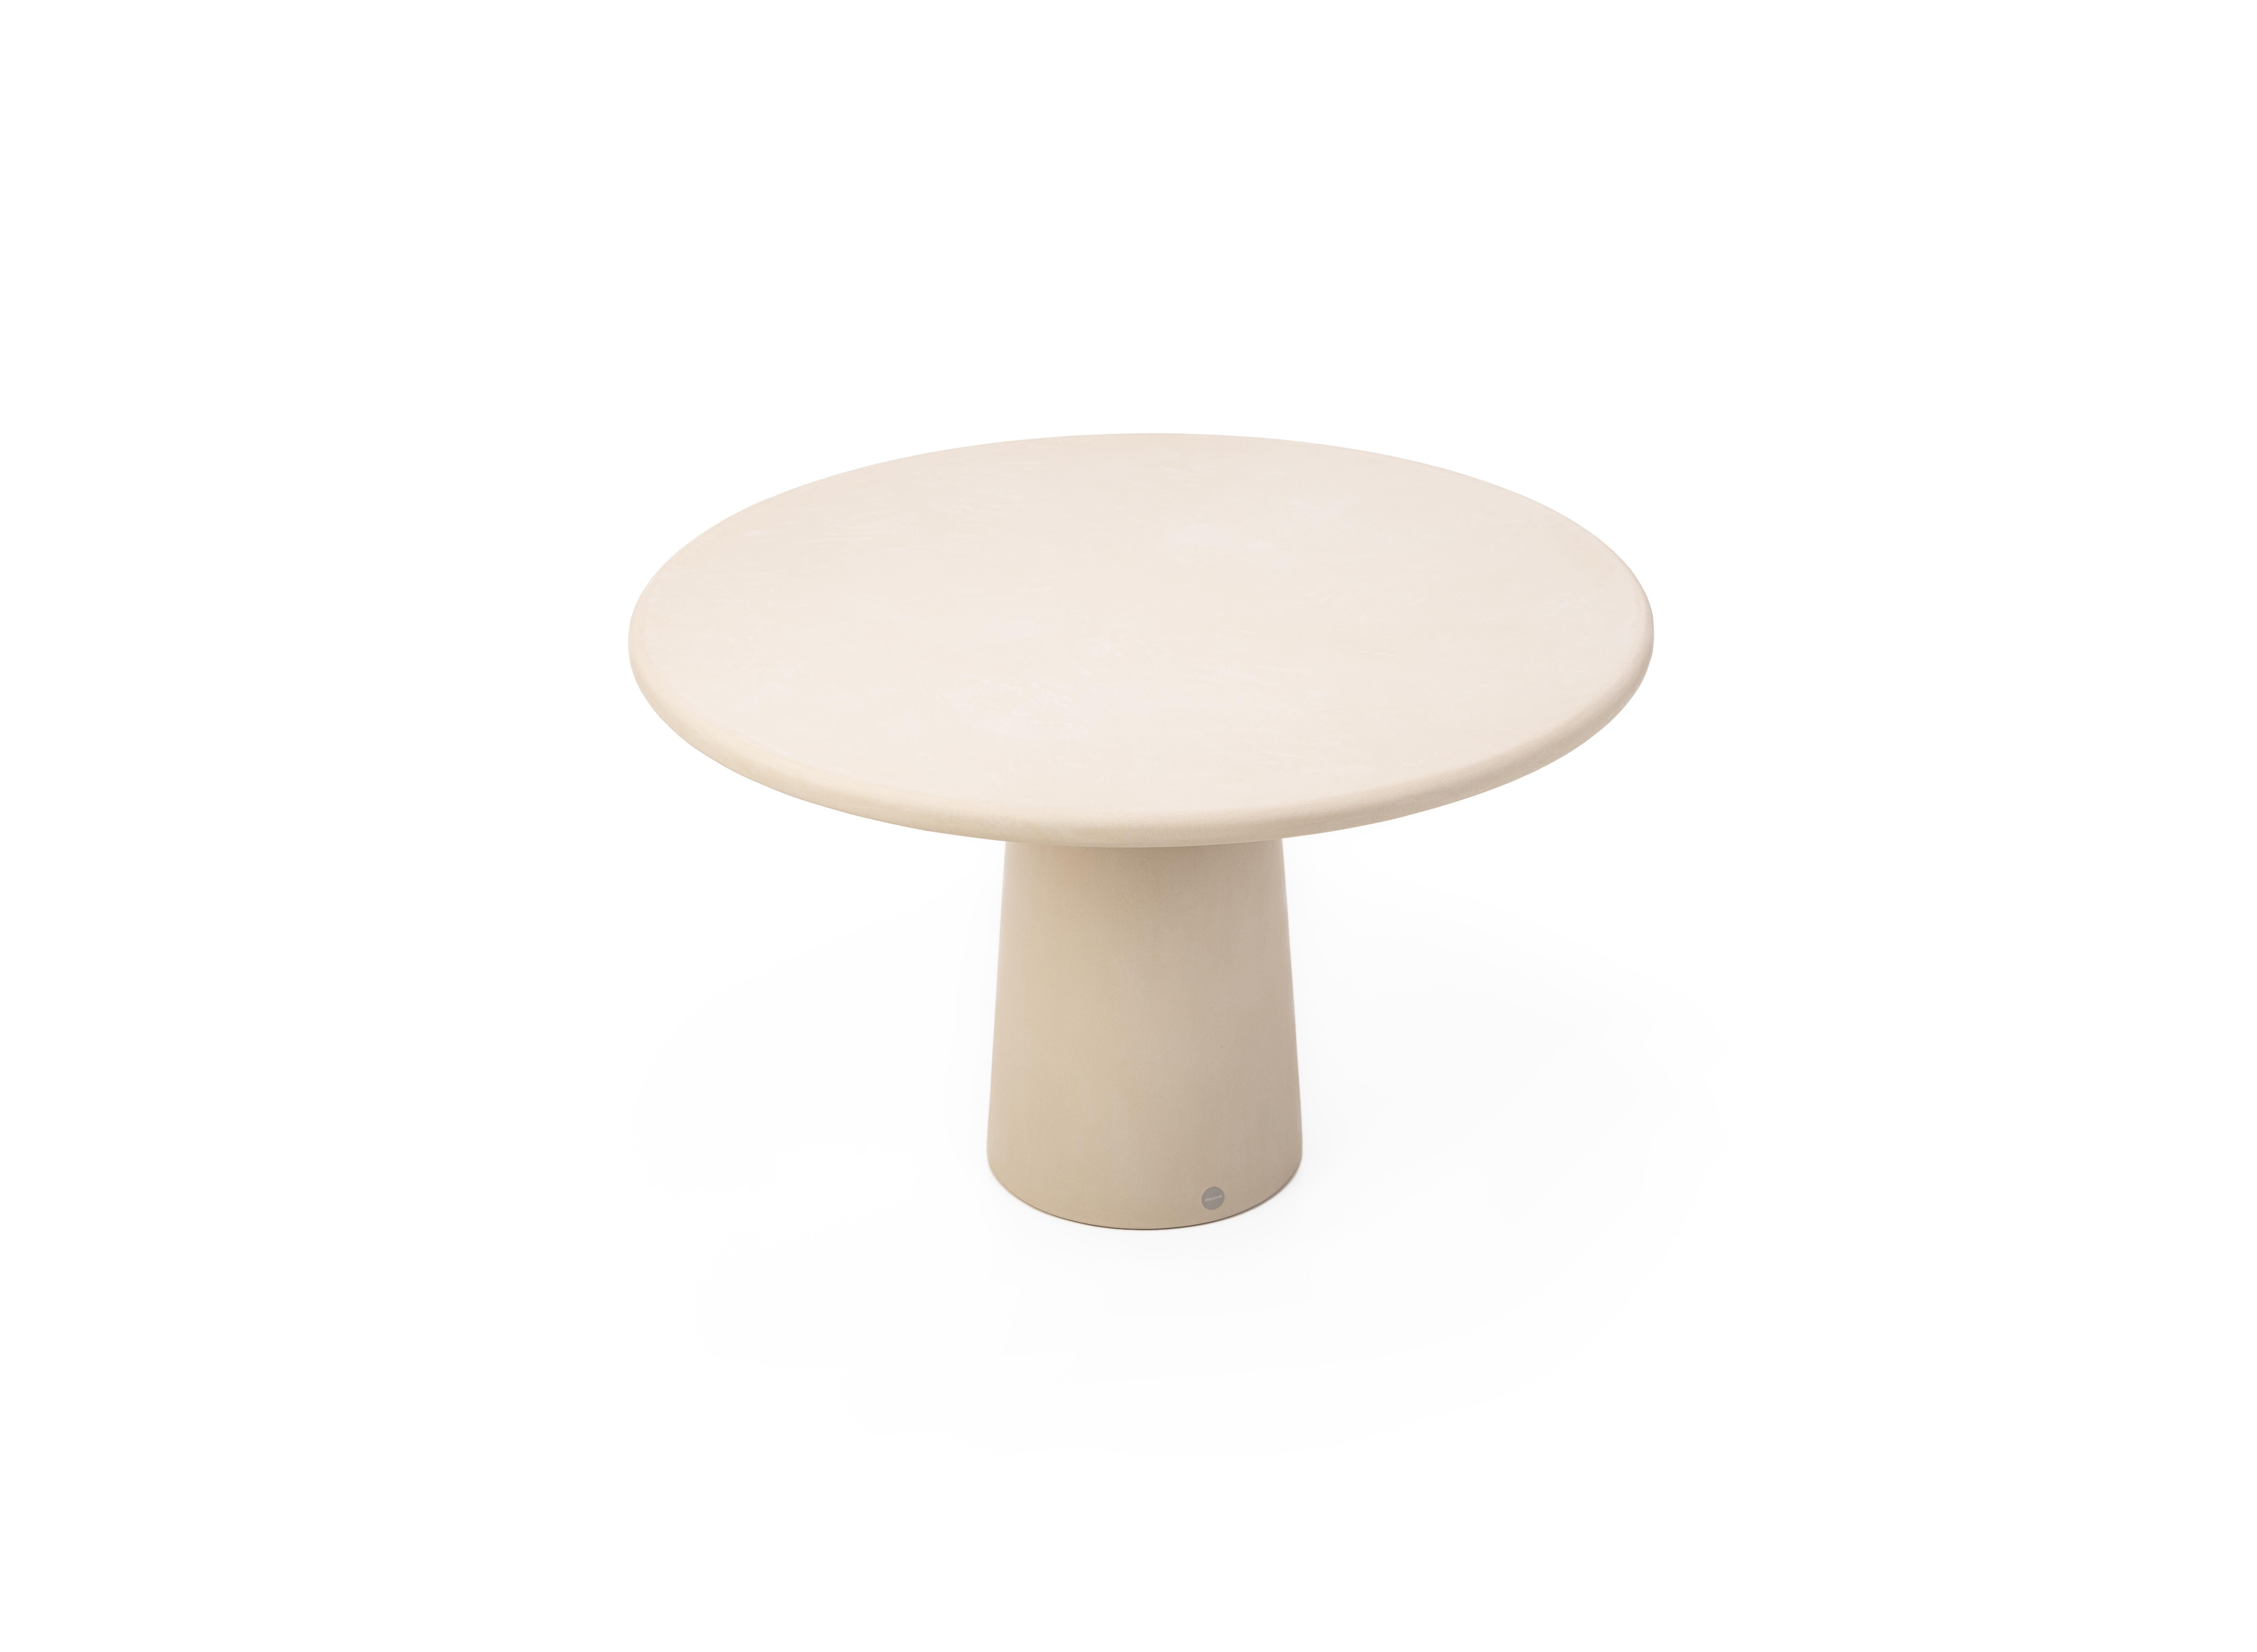 Contemporary Belgian design, handmade natural plaster table with a textured and earthy character.

Indoor use (price outdoor +10%)

Inspired by the menhir shape; An upright, elongated stone placed by prehistoric people in Celtic areas 4000-6000